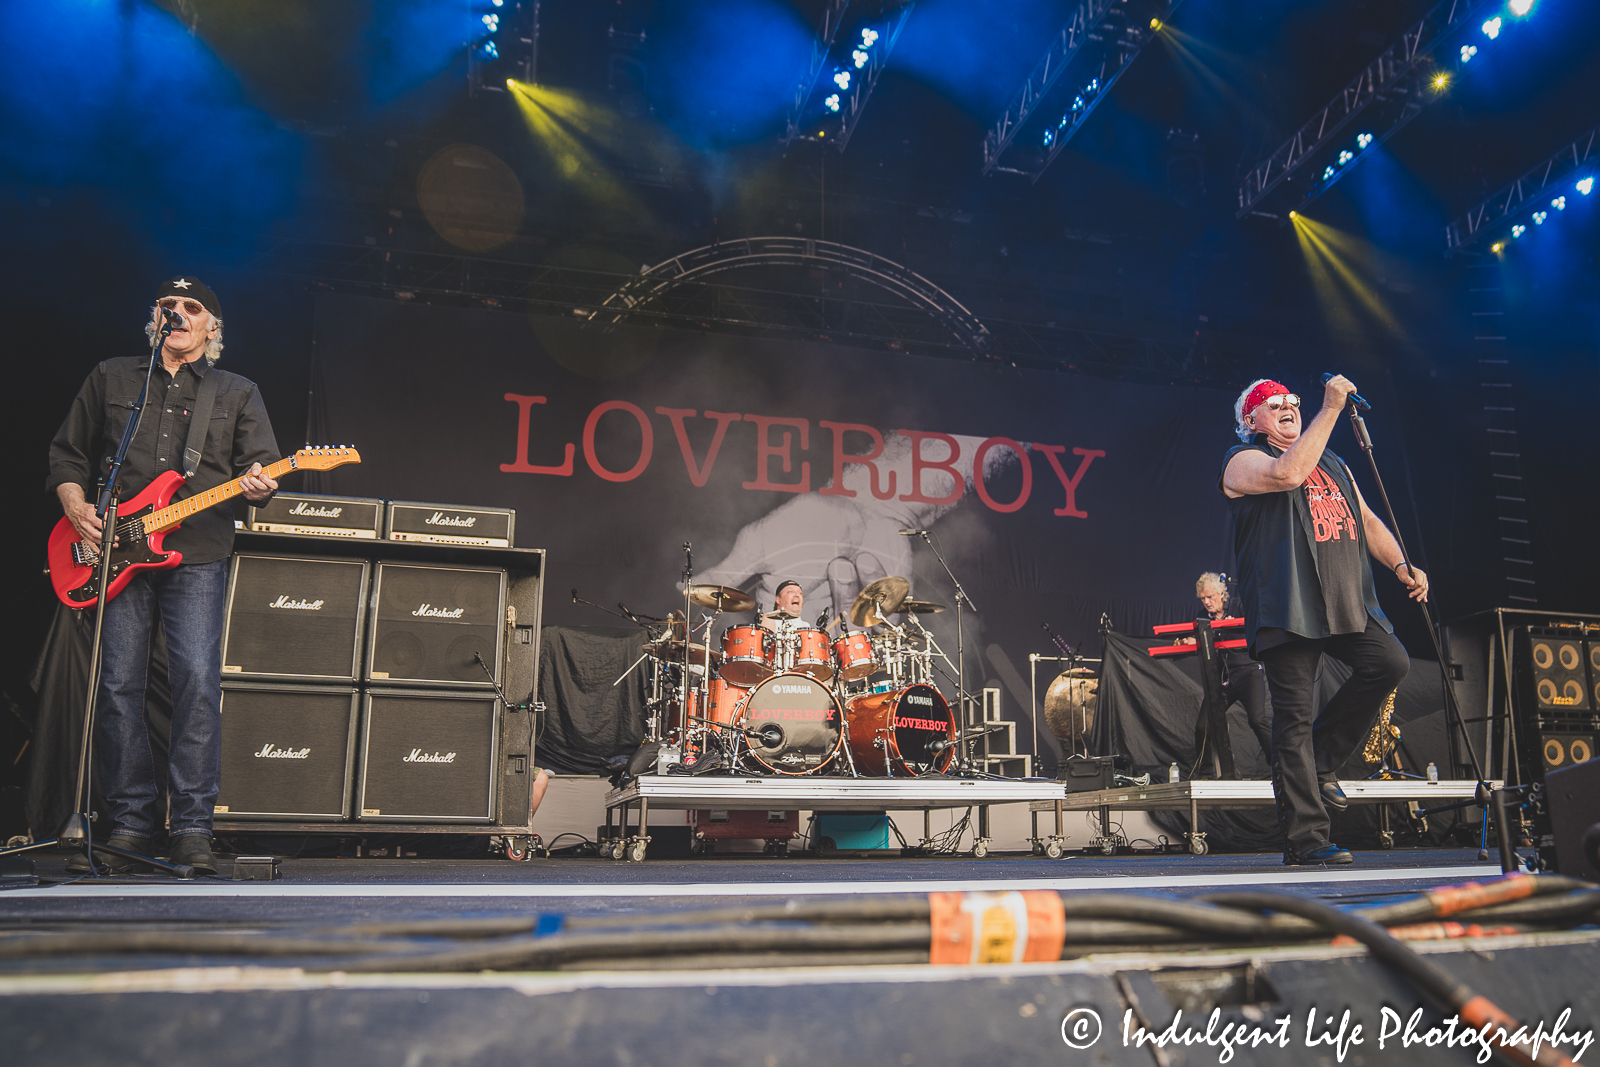 Canadian rock band Loverboy opening its concert with "Notorious" at Starlight Theatre in Kansas City, MO on July 18. 2023.